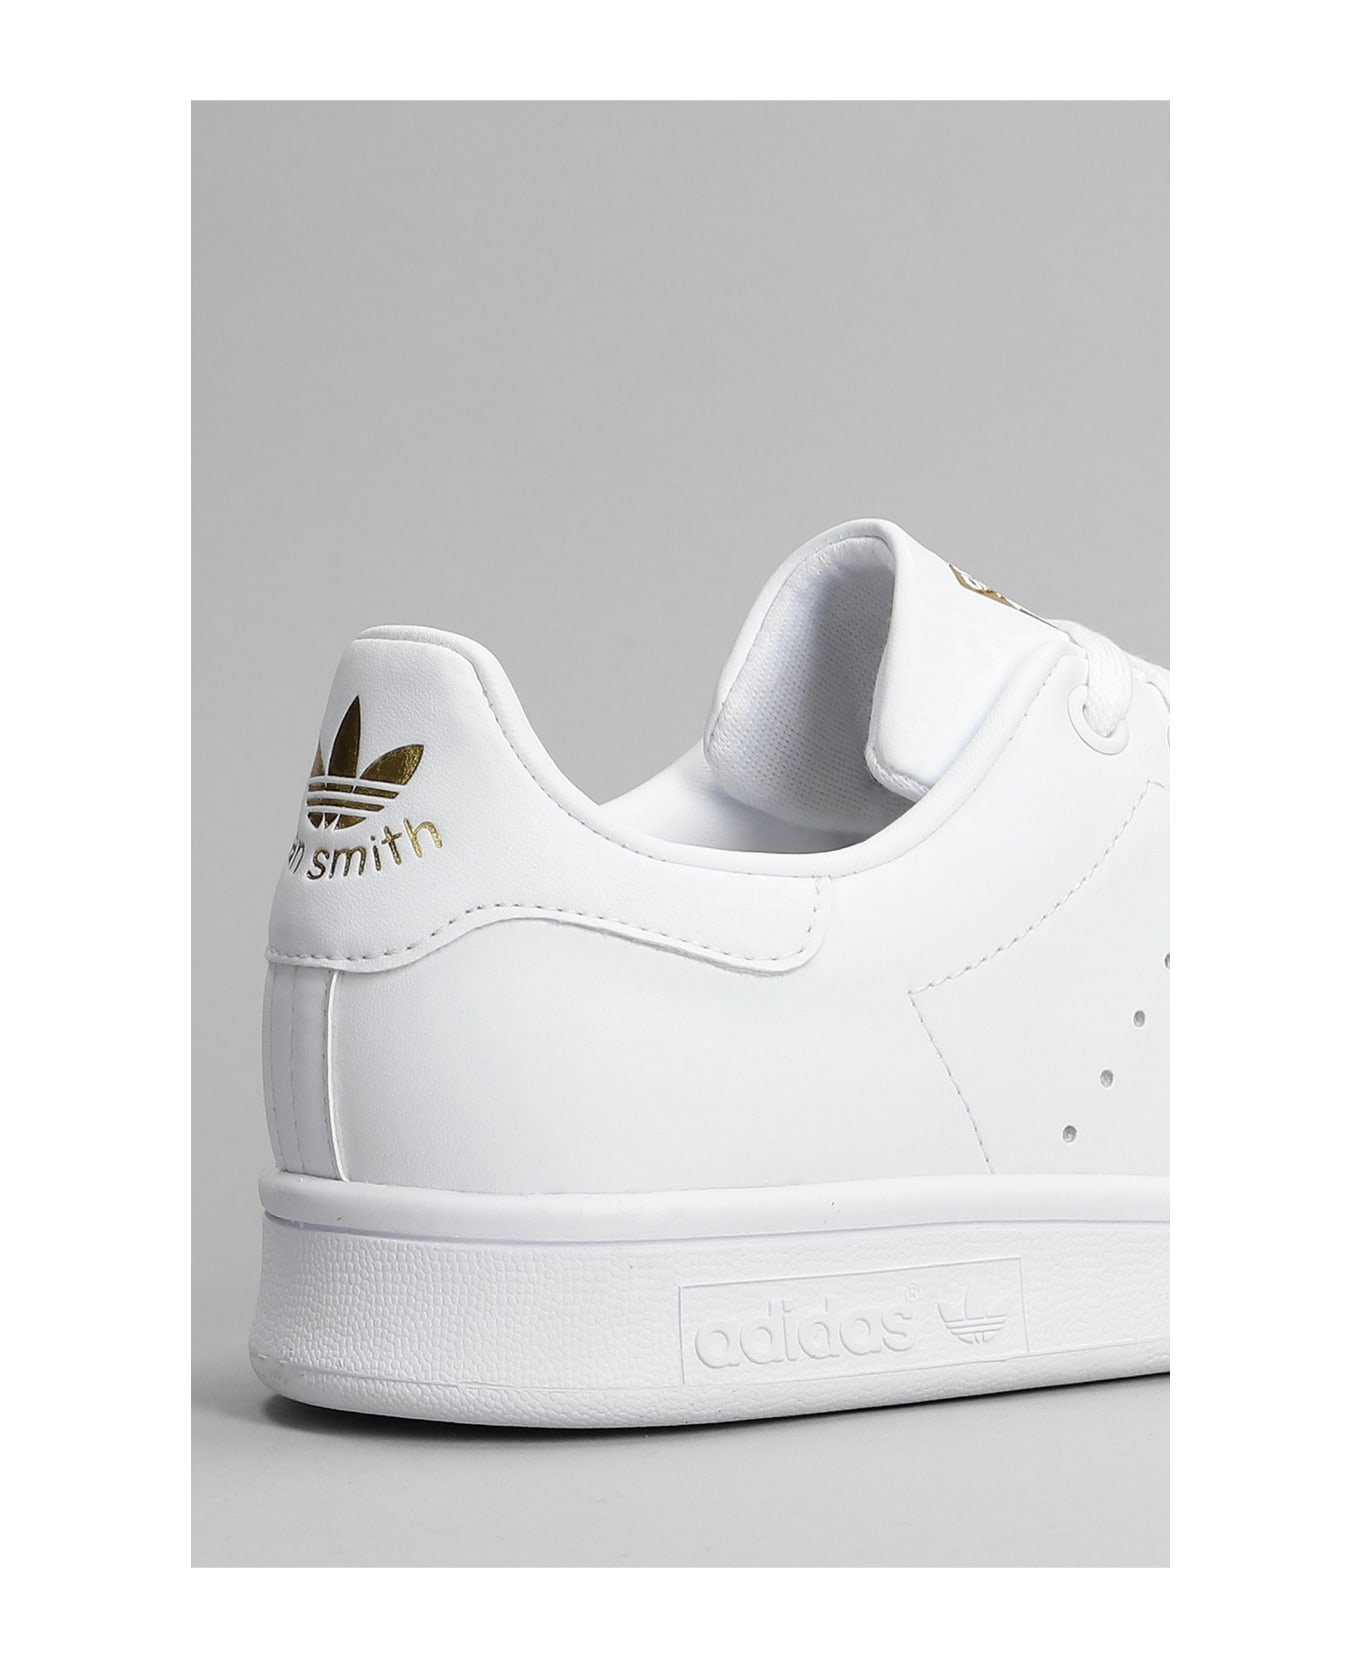 Adidas Stan Smith Sneakers In White Leather スニーカー